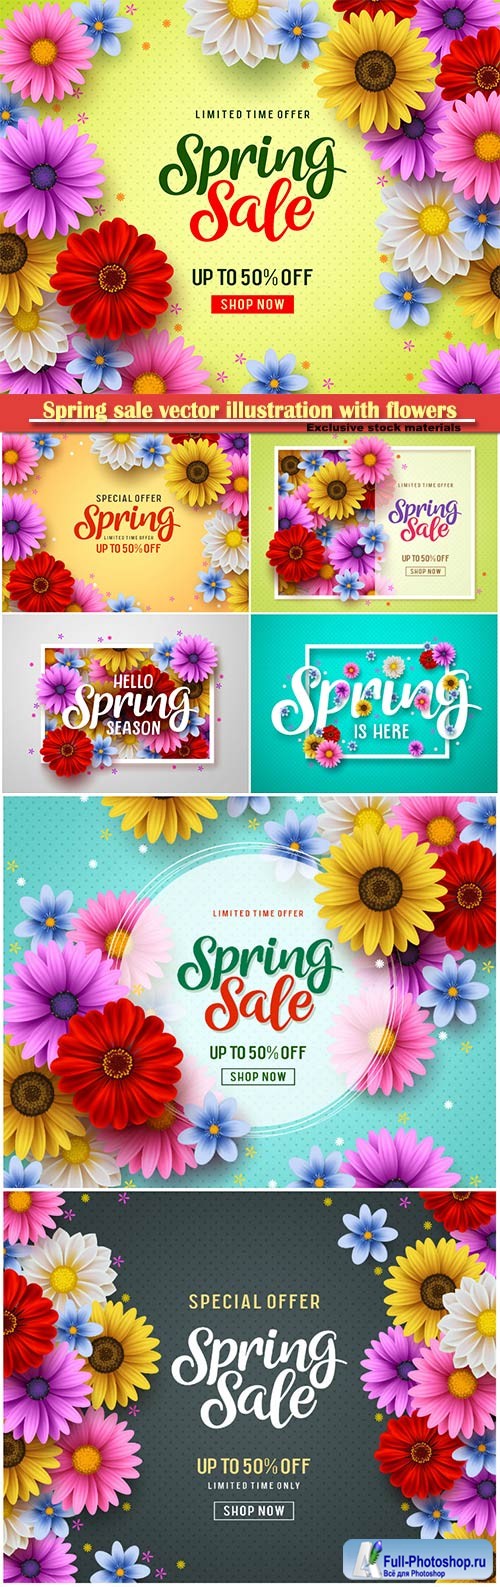 Spring sale vector illustration with flowers